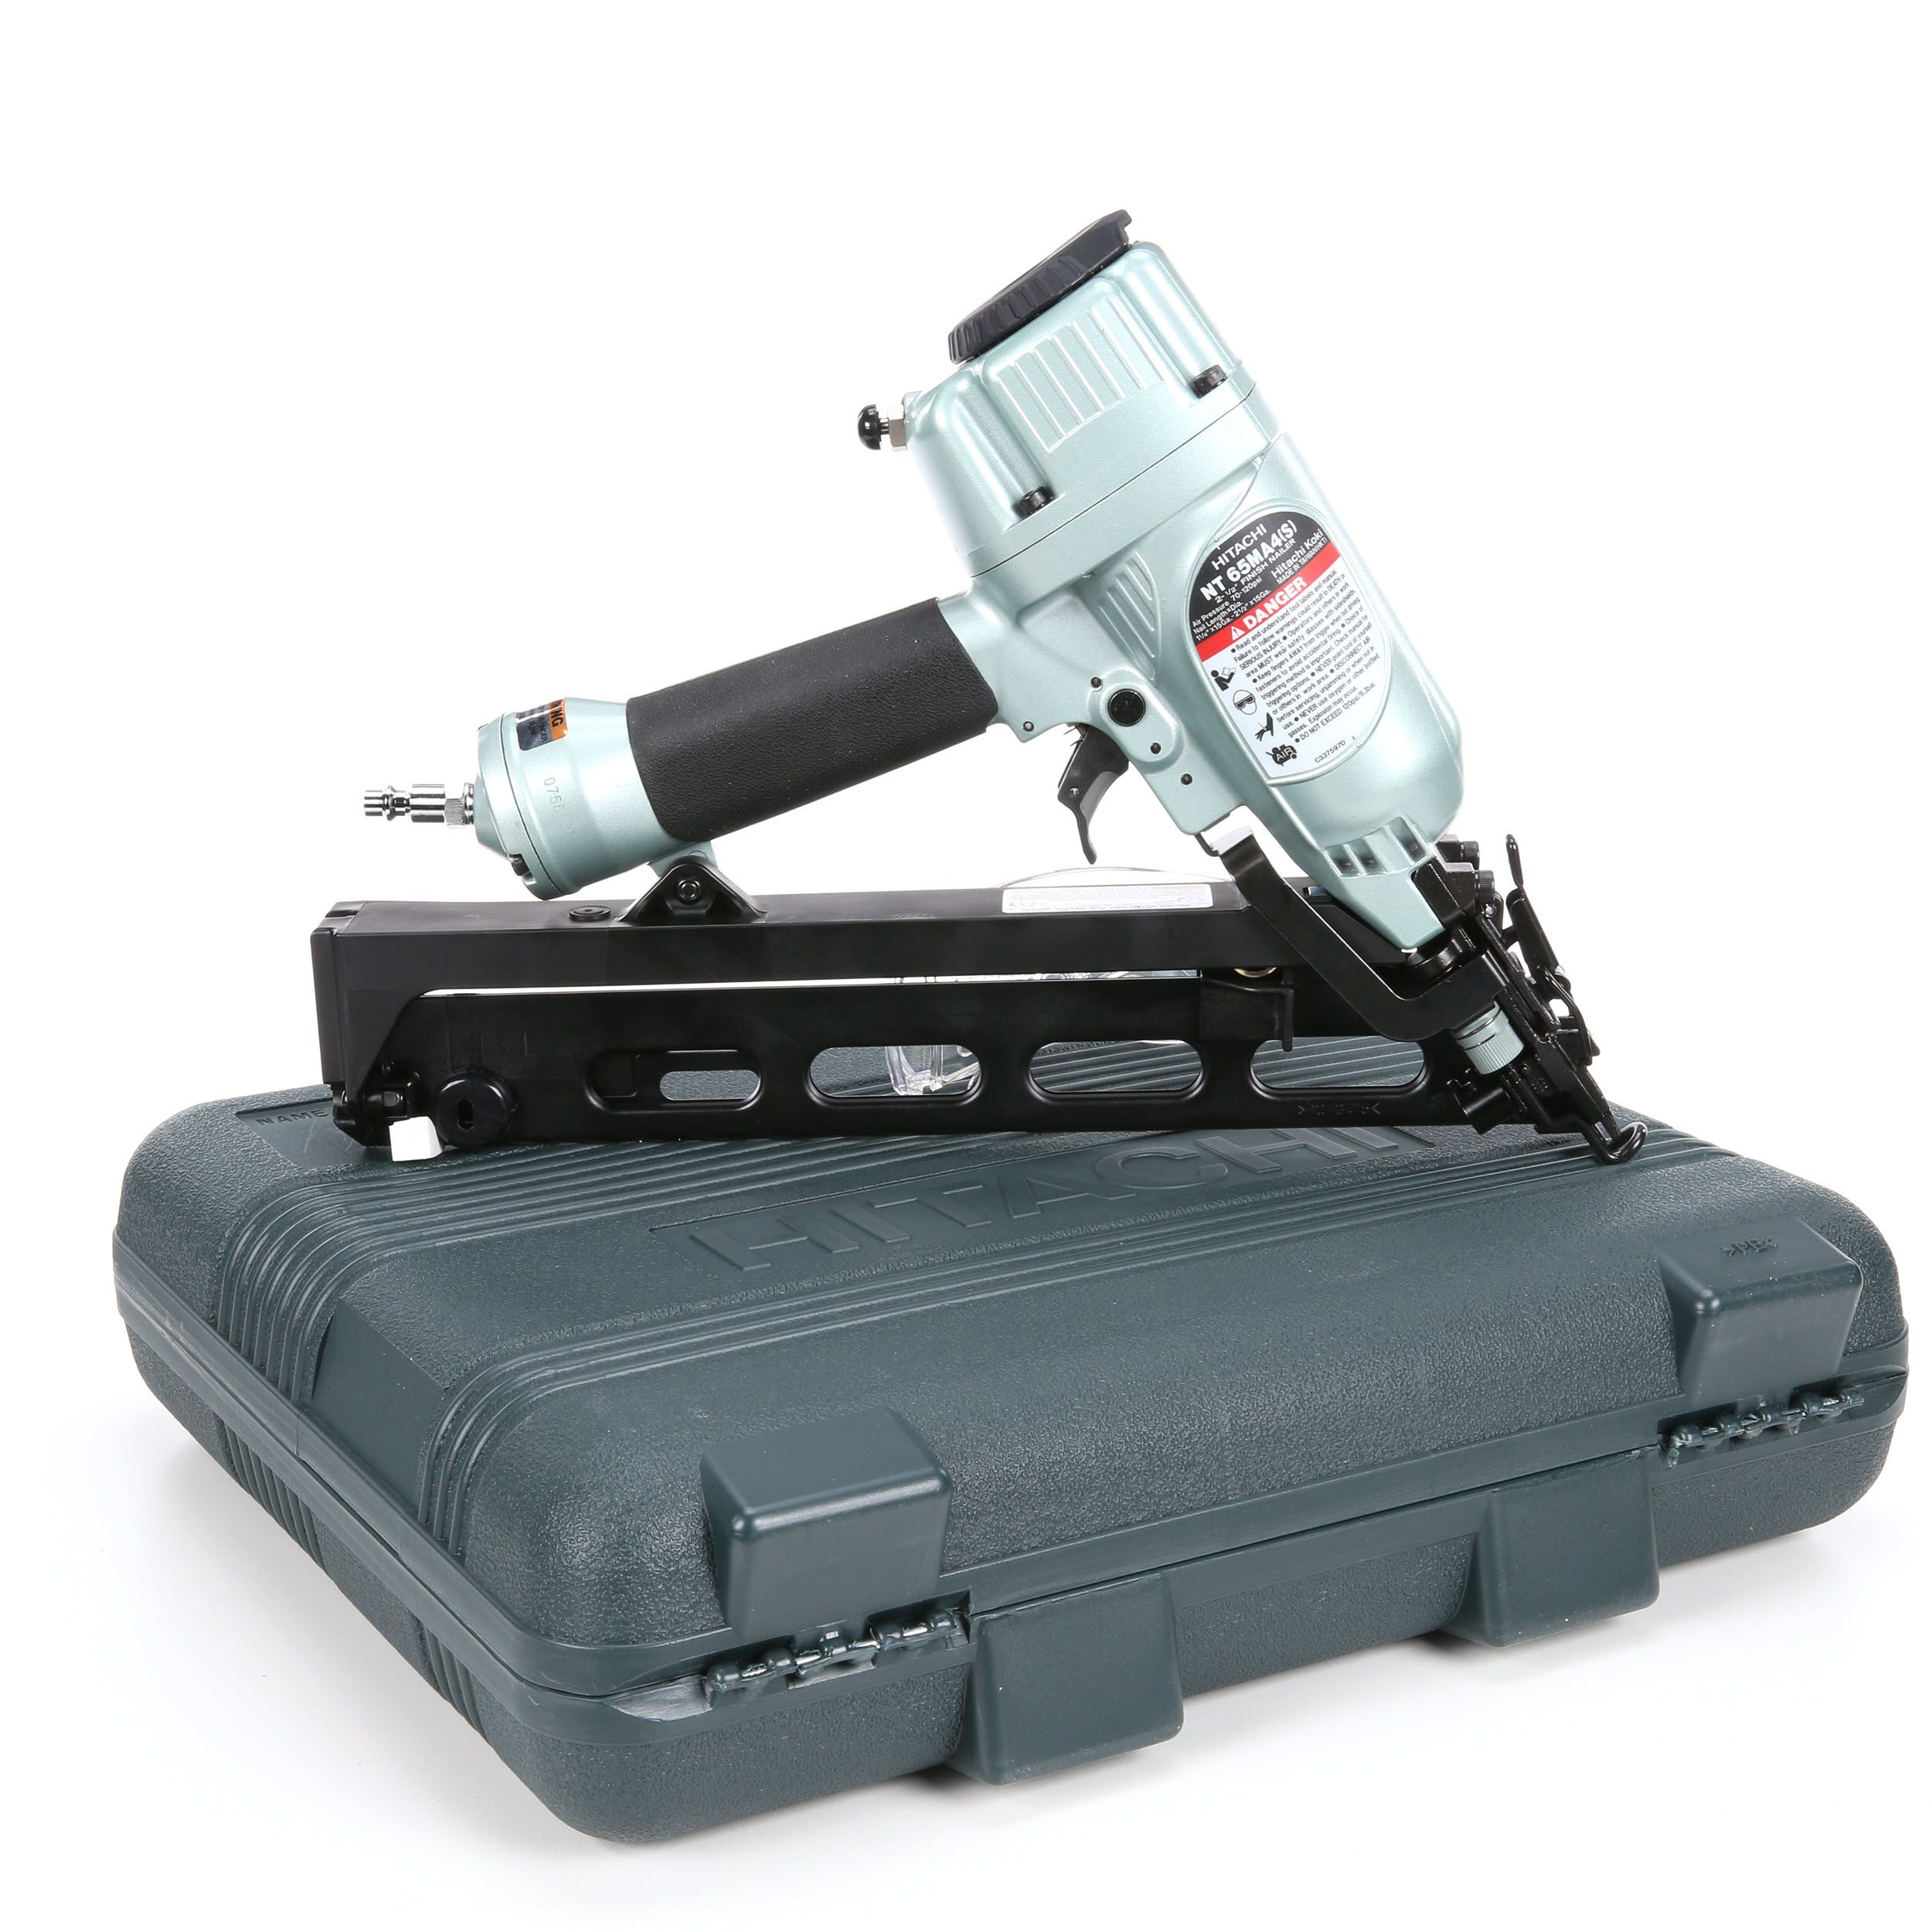 Hitachi NT65MA4 Adhesive Air Finish Nailer for sale online 